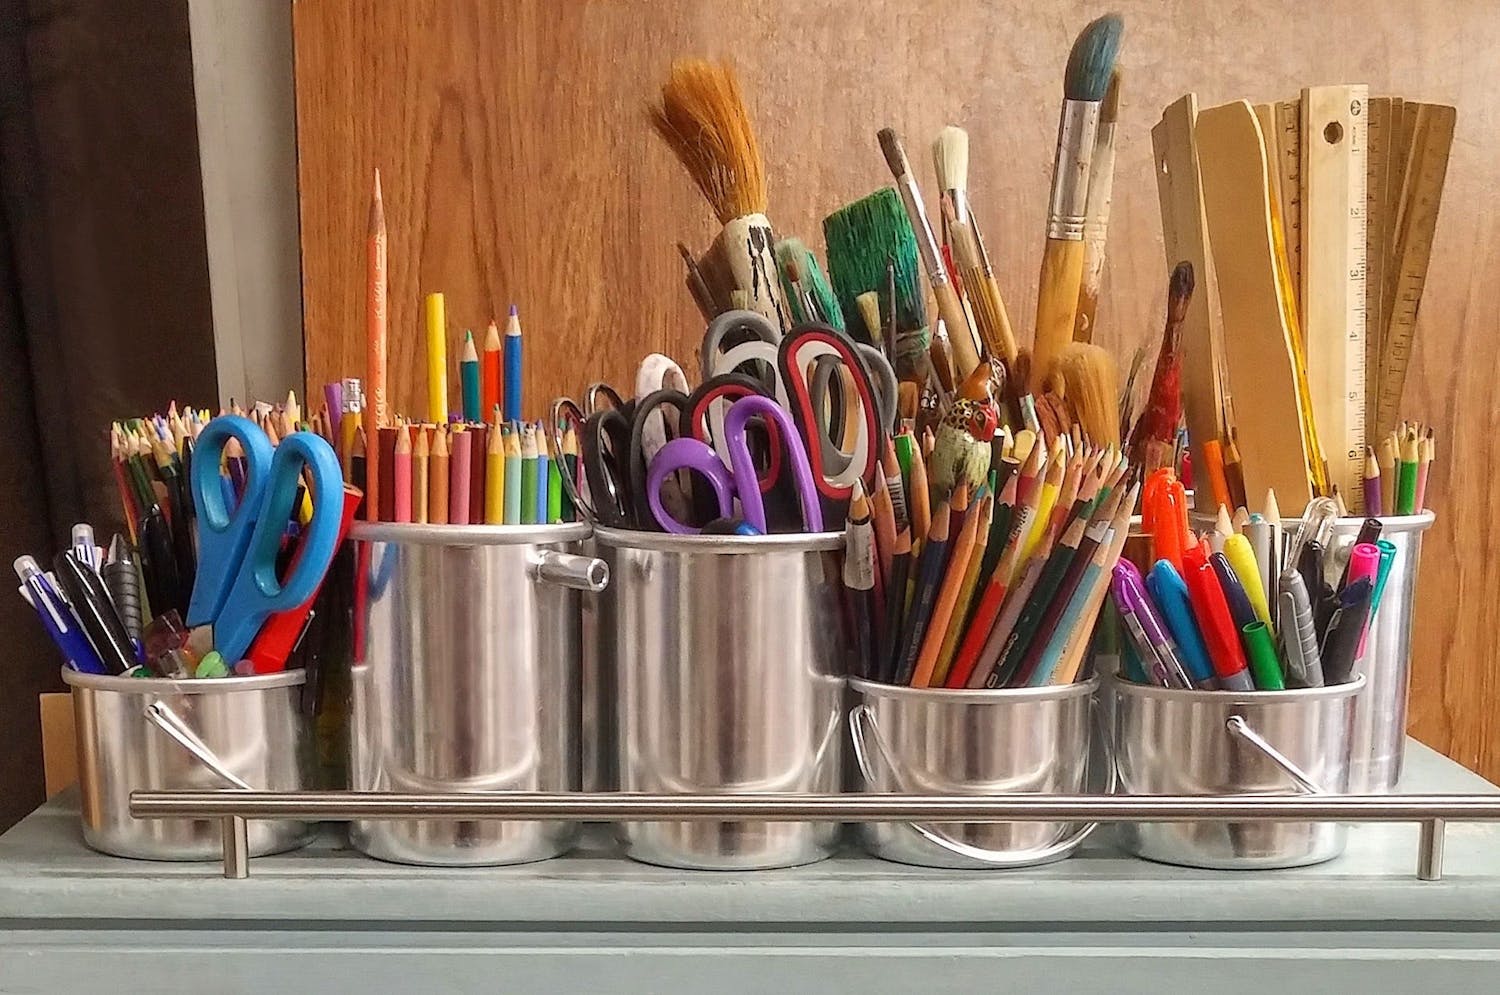 Pencils and paint brushes in stainless steel bucket